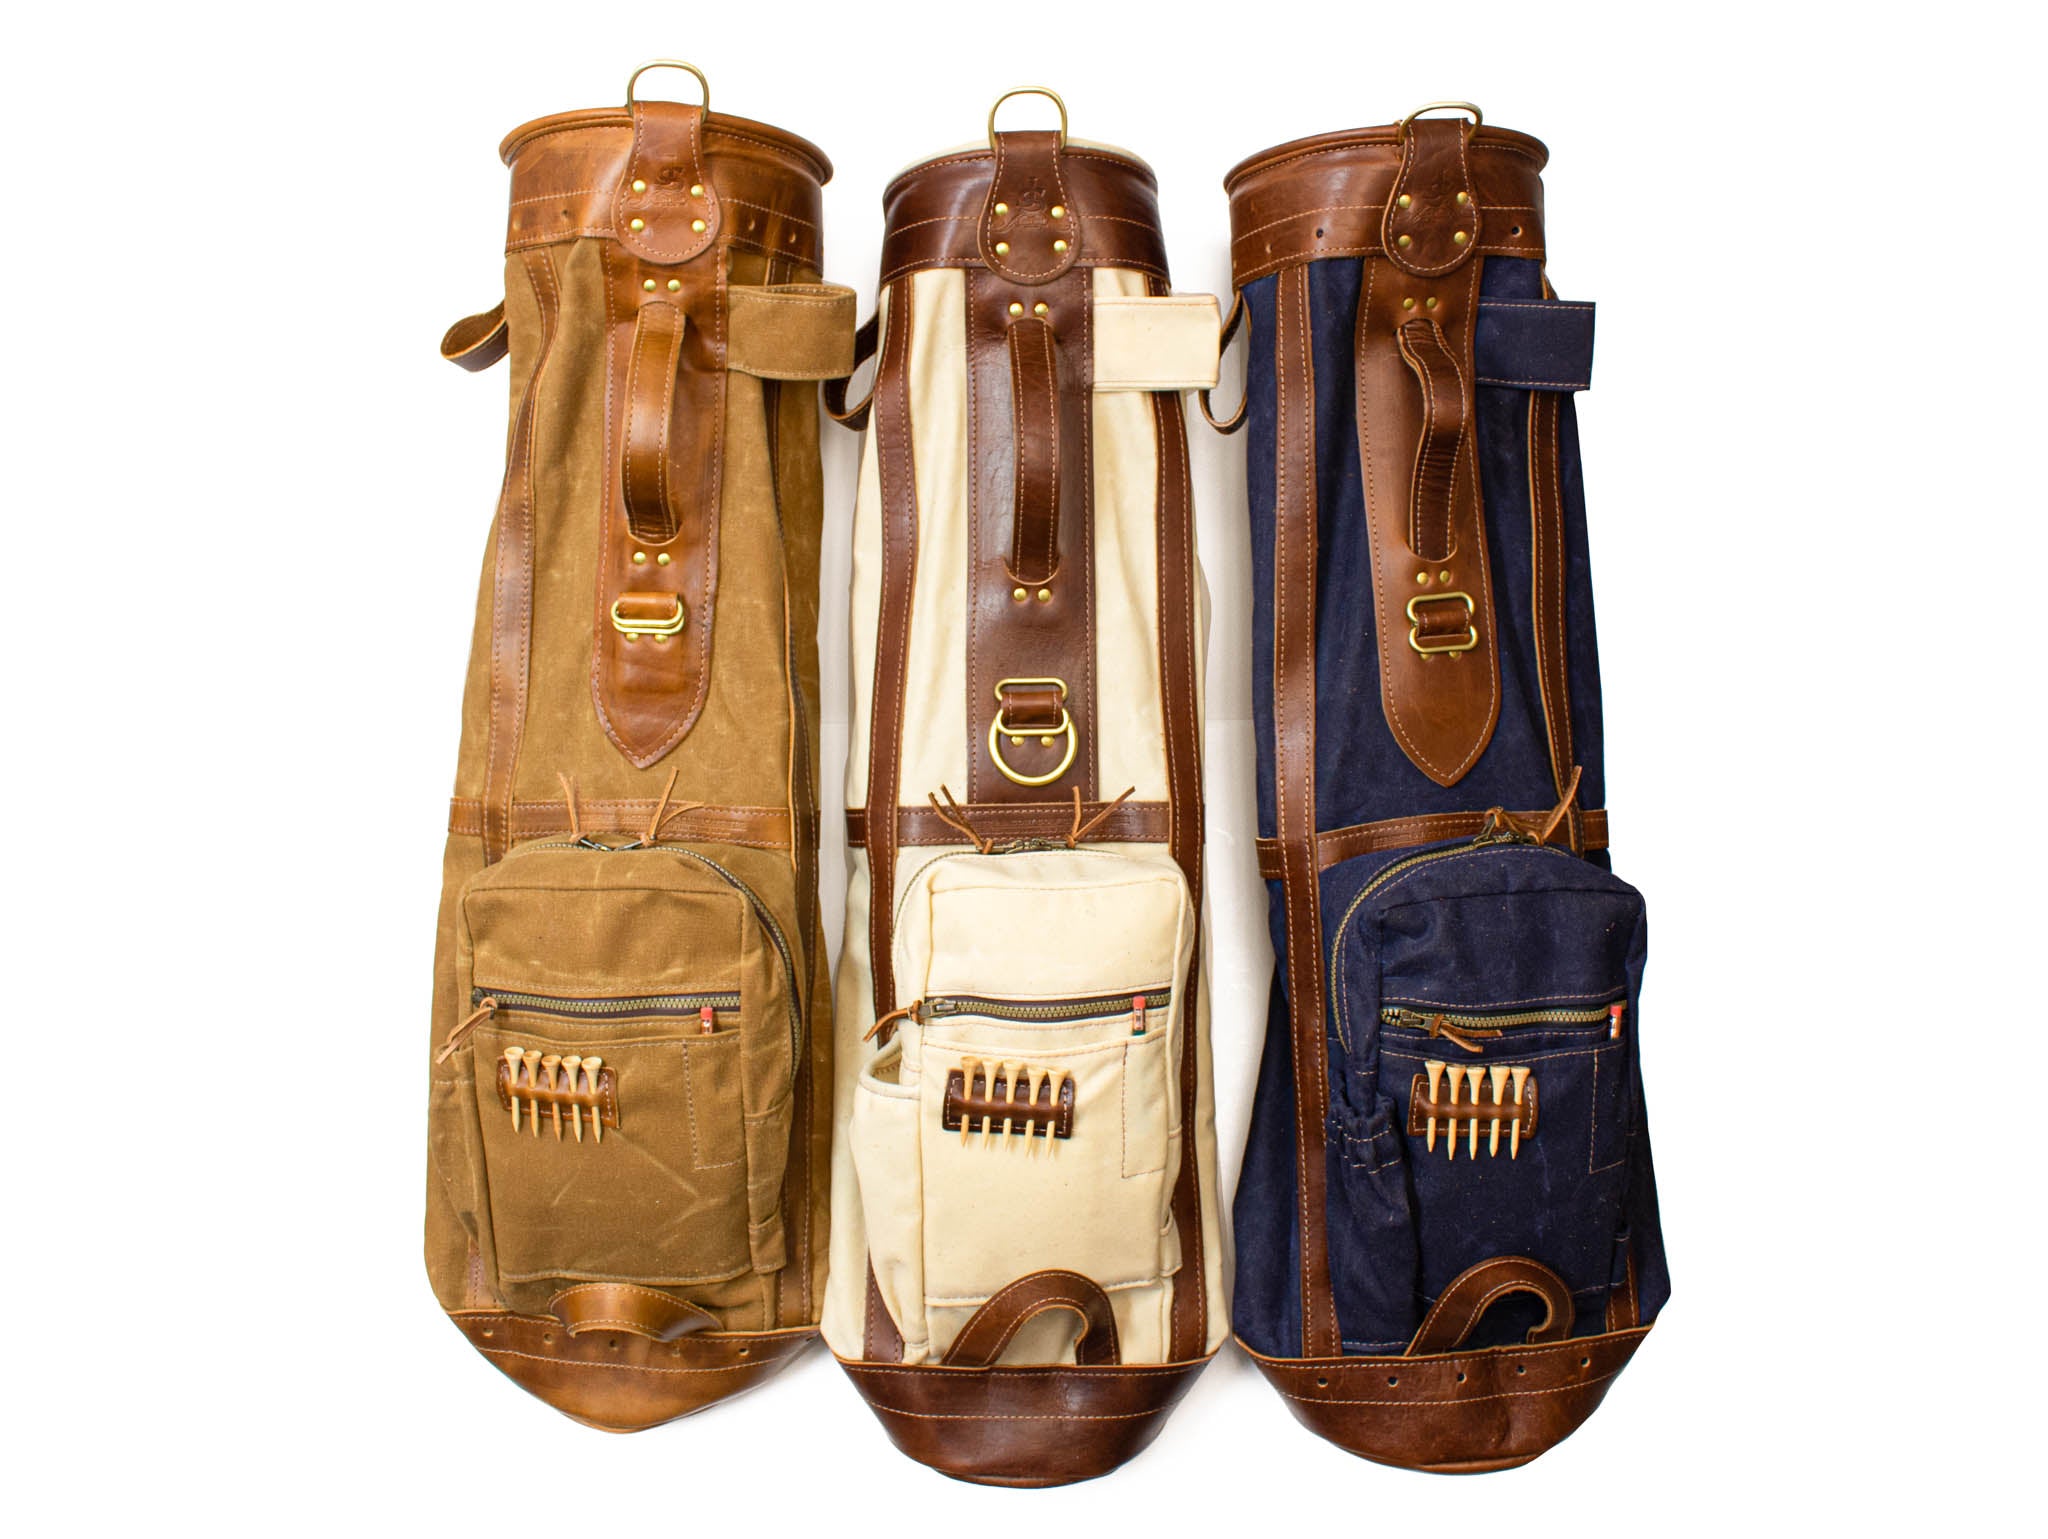 Collapsible Golf Bags